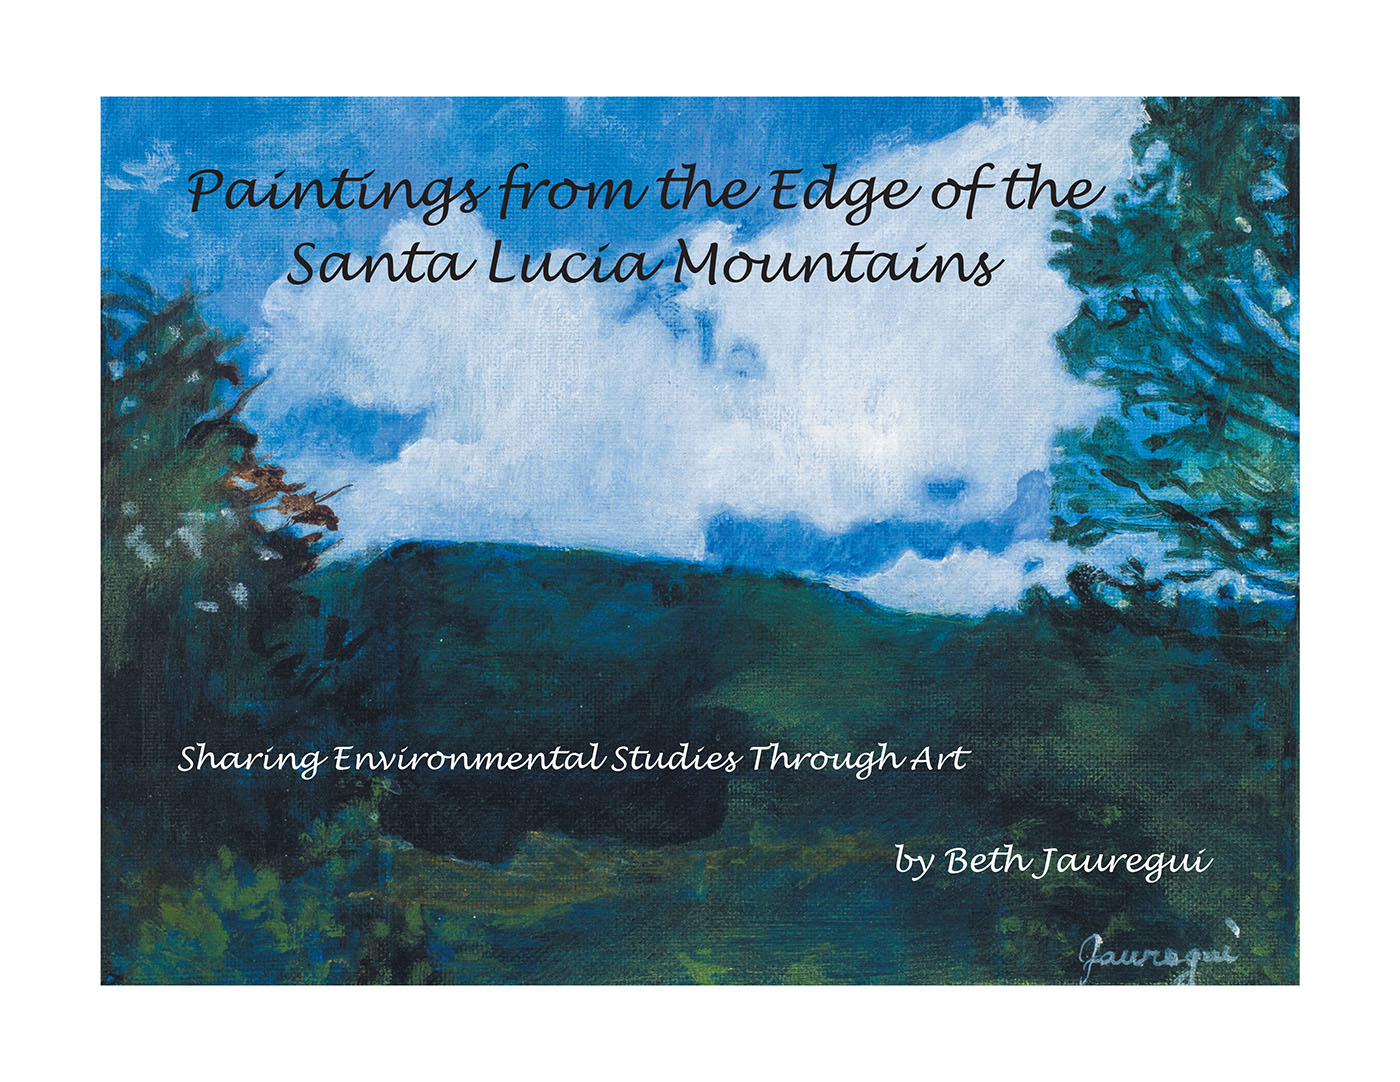 Beth Jauregui’s New Book, "Paintings from the Edge of the Santa Lucia Mountains," Takes Readers on a Fascinating Journey Through the Author’s Artwork of the Carmel Valley